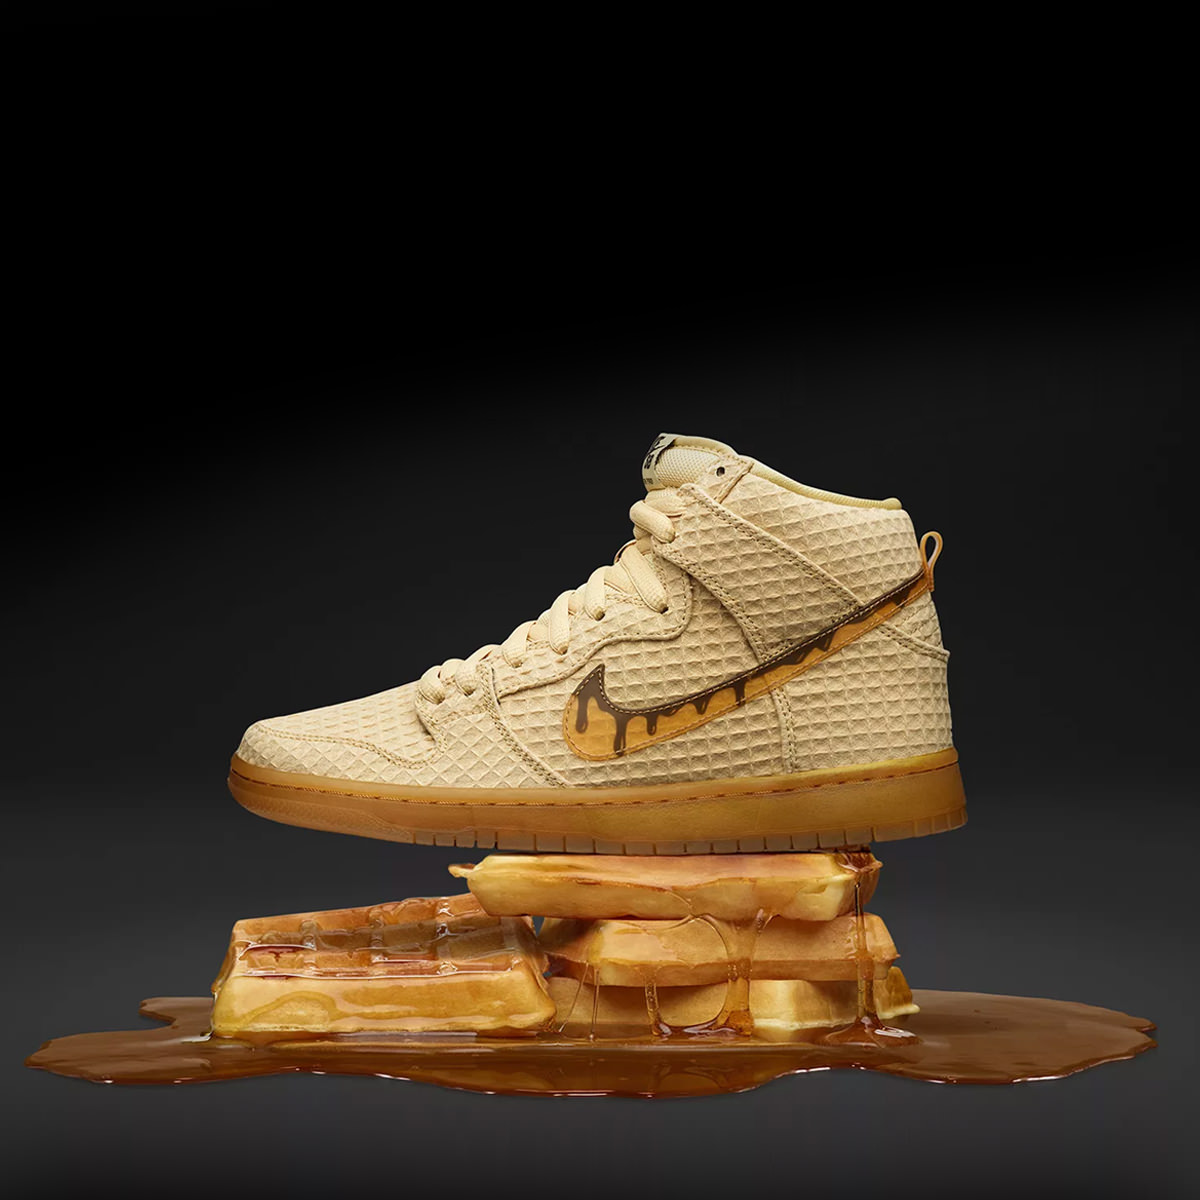 chicken and waffles dunks